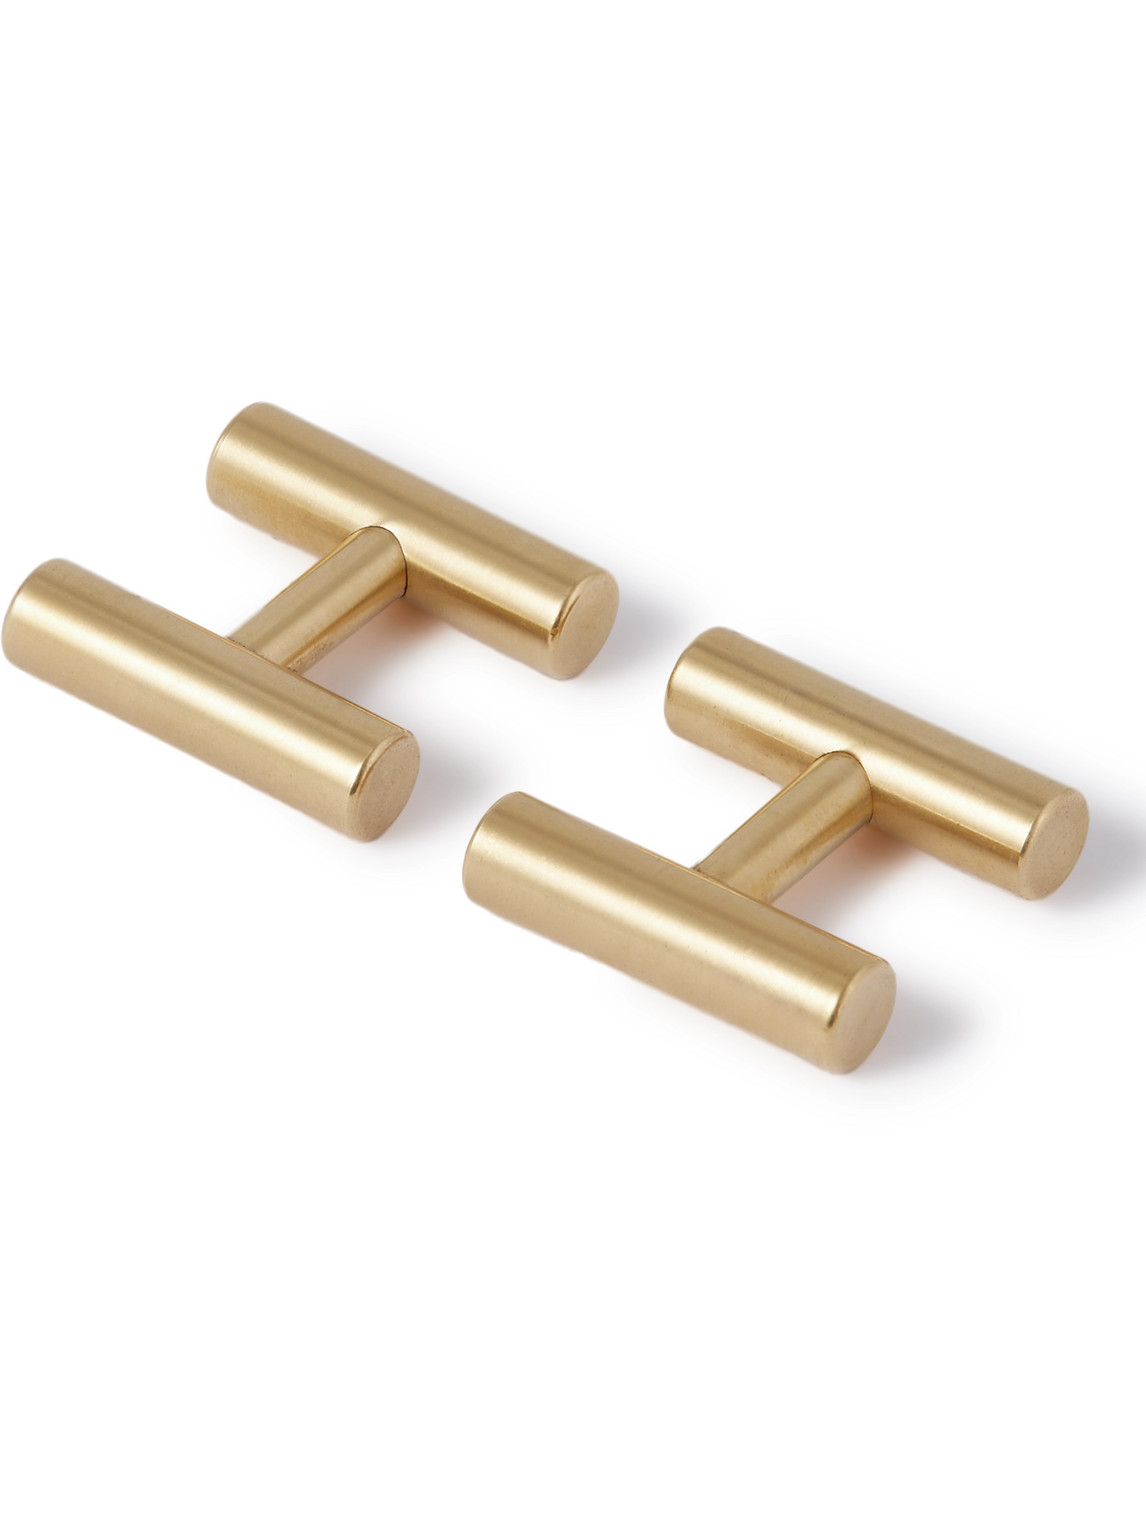 Alice Made This Kitson Gold-tone Cufflinks